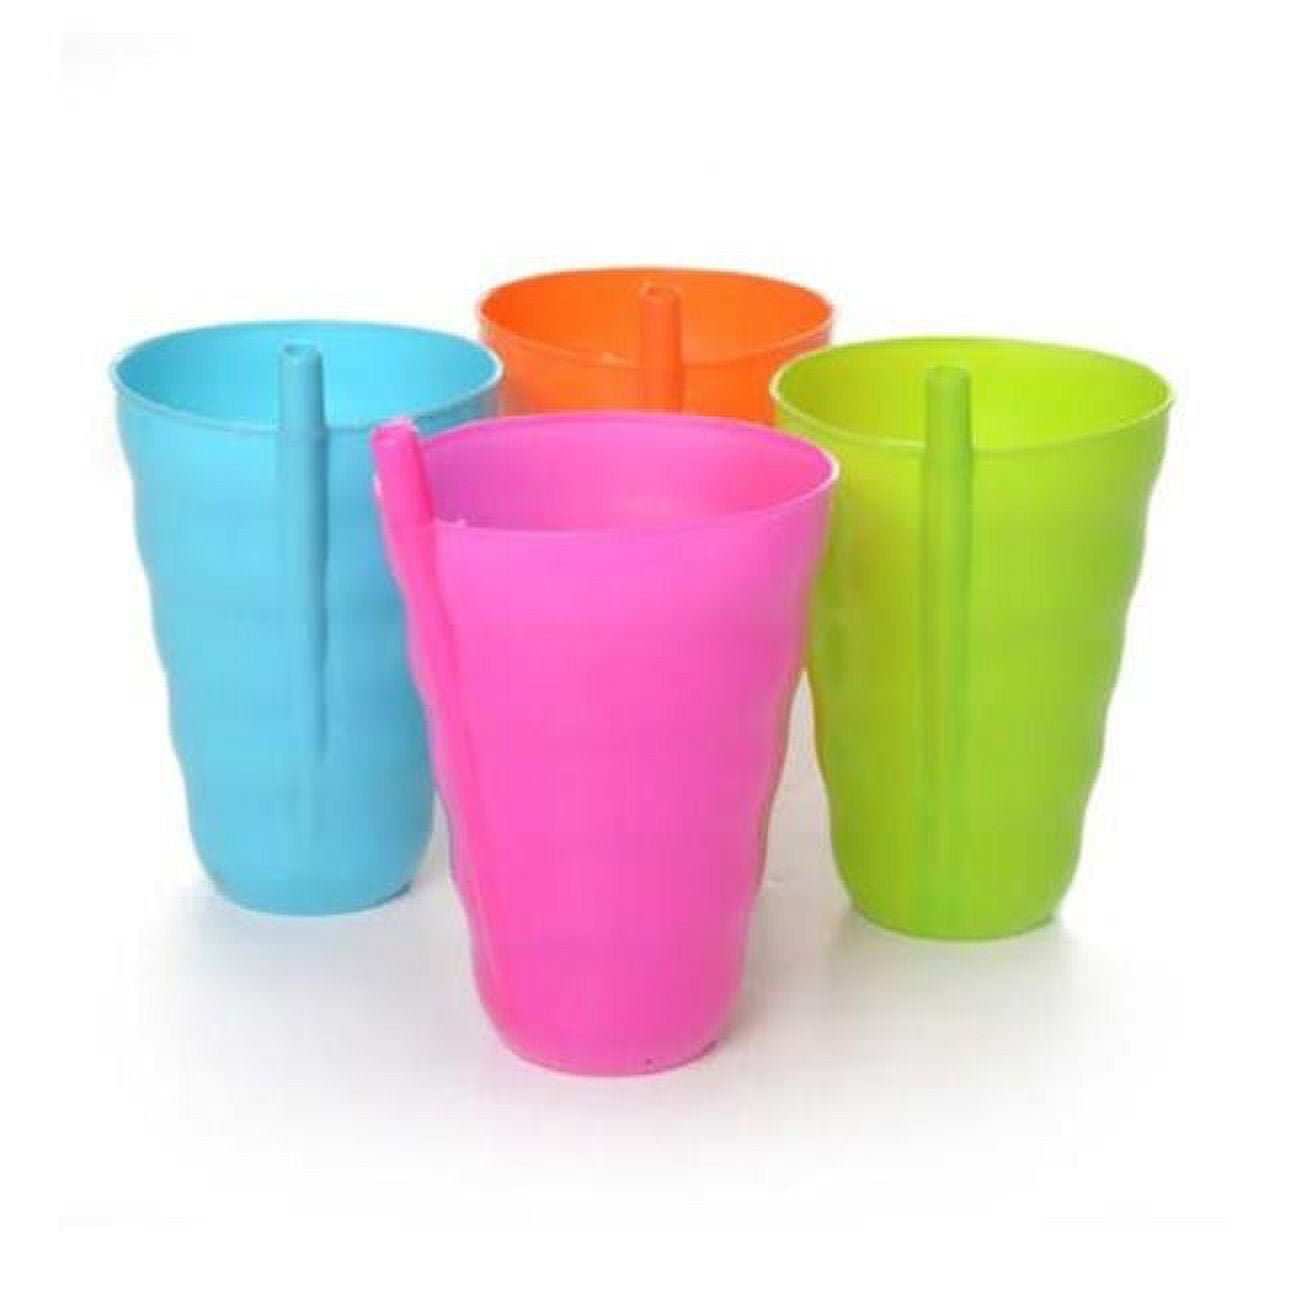 2324428 Plastic Cups With Straw, 4 Colors - Case Of 24